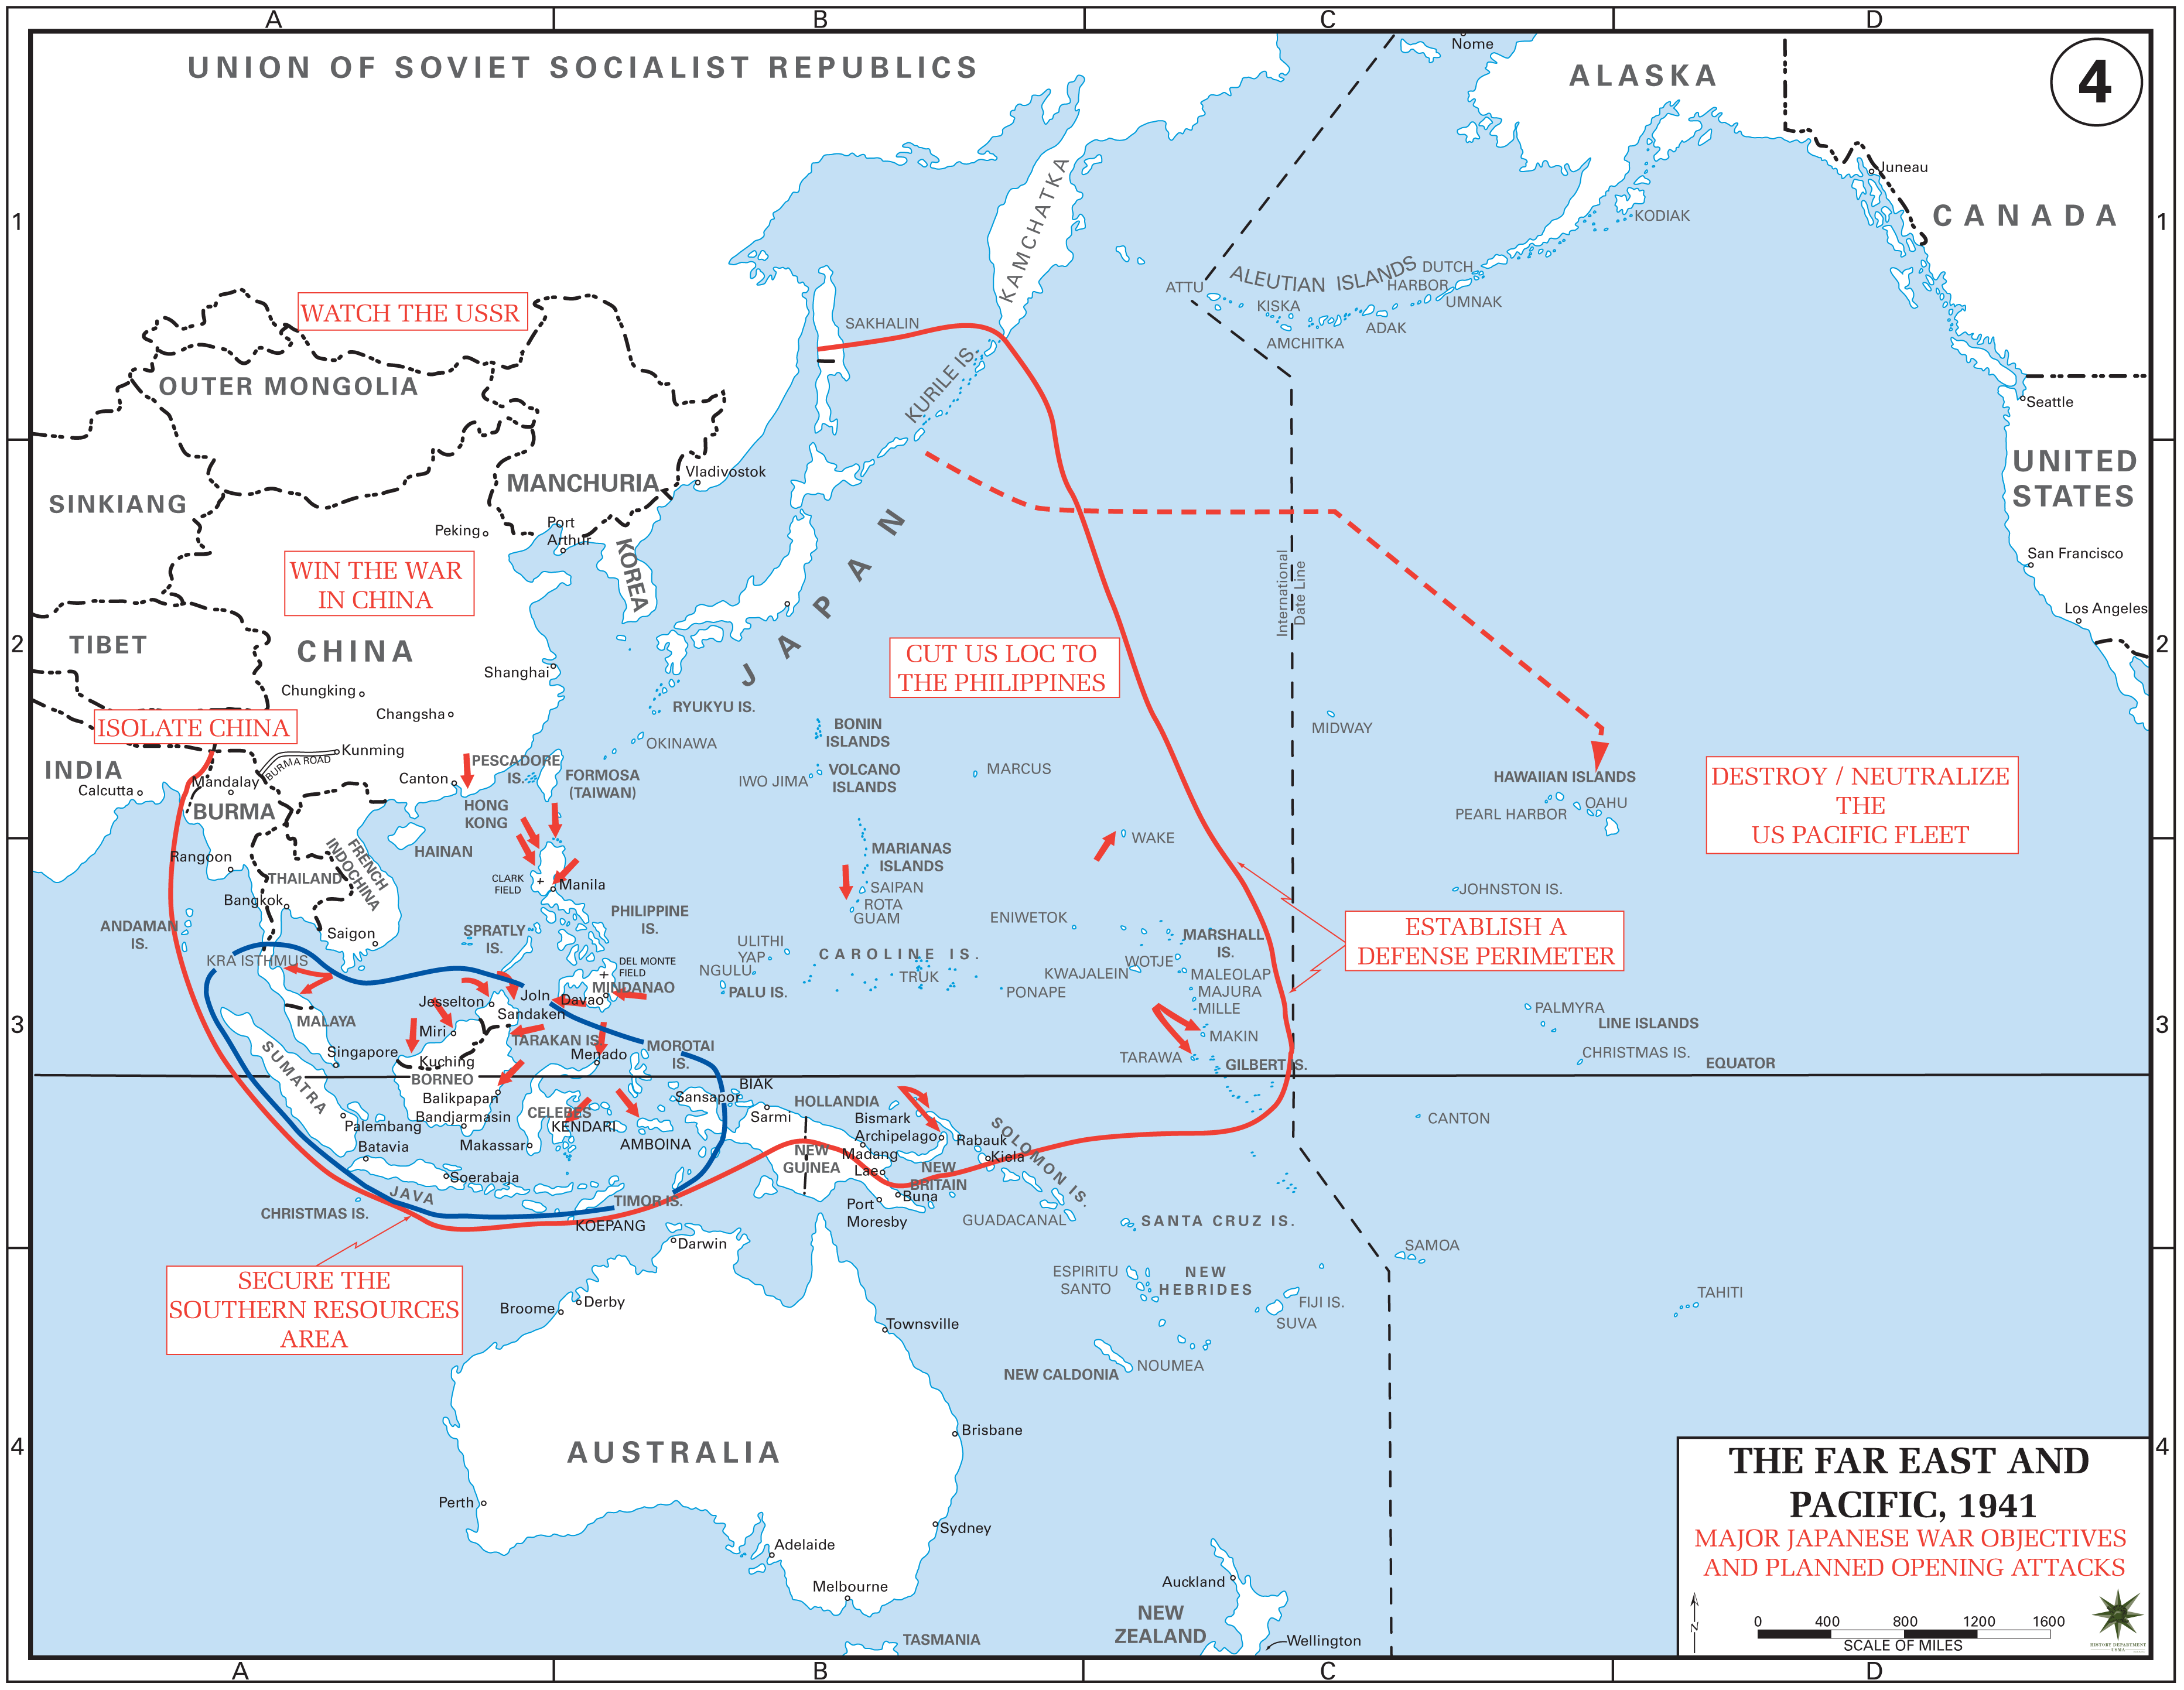 Japanese war objectives and planned opening attacks in World War II